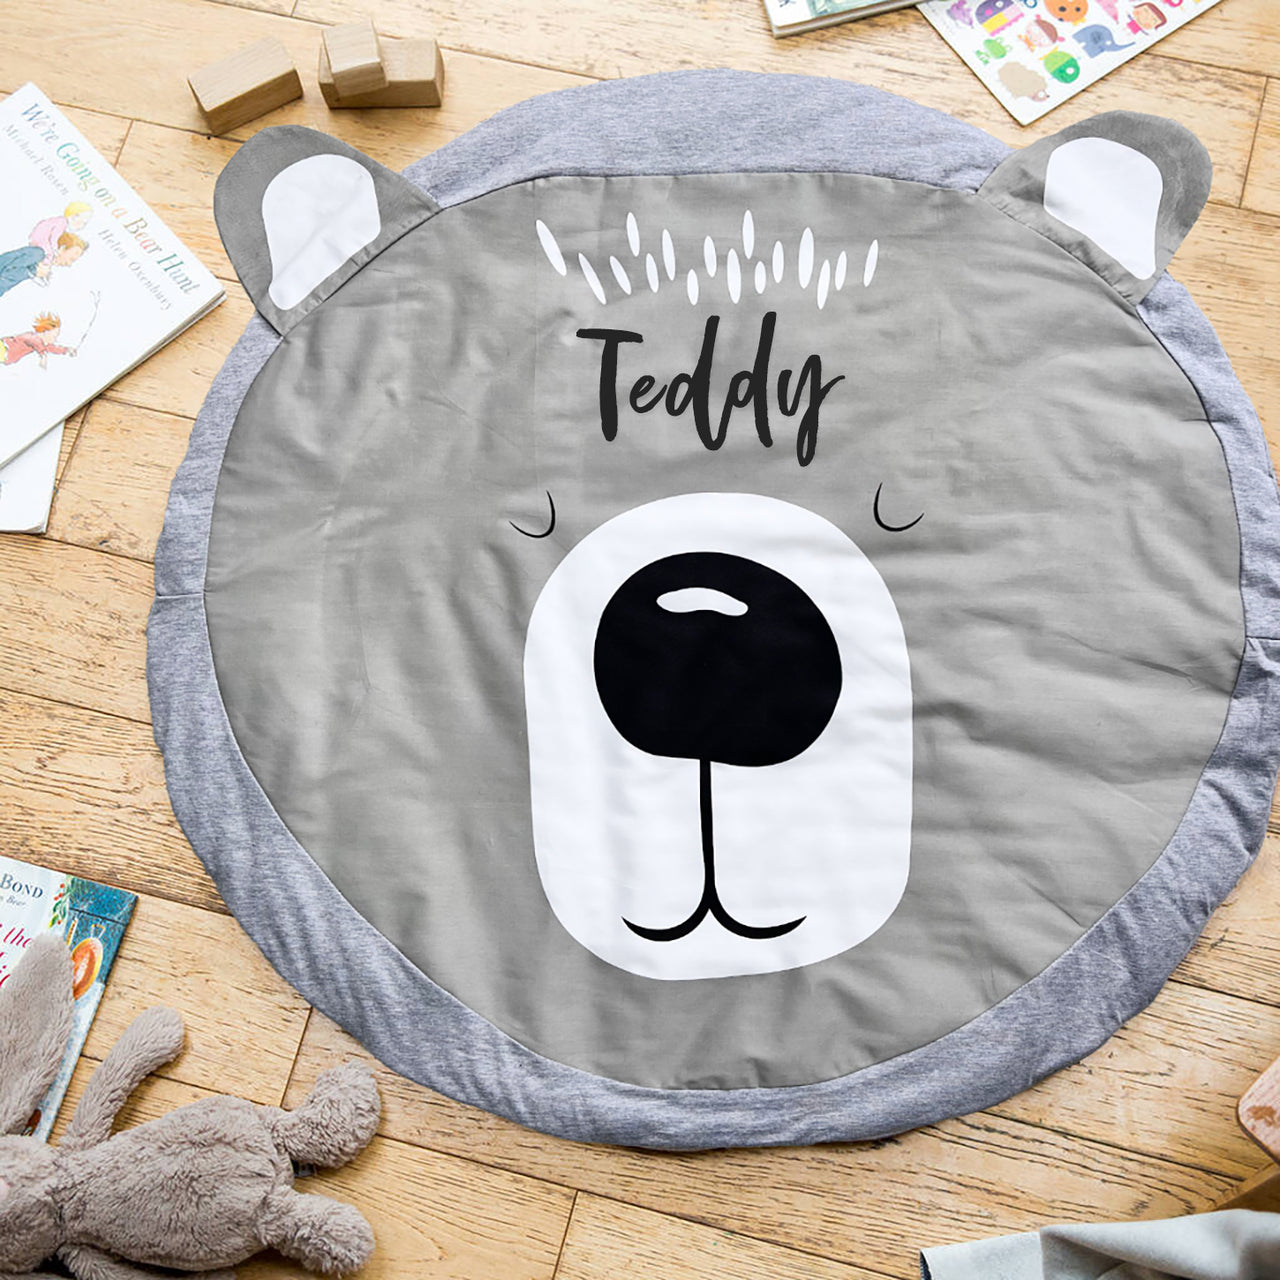 Personalised Adorable Bear Face Baby Play Mat